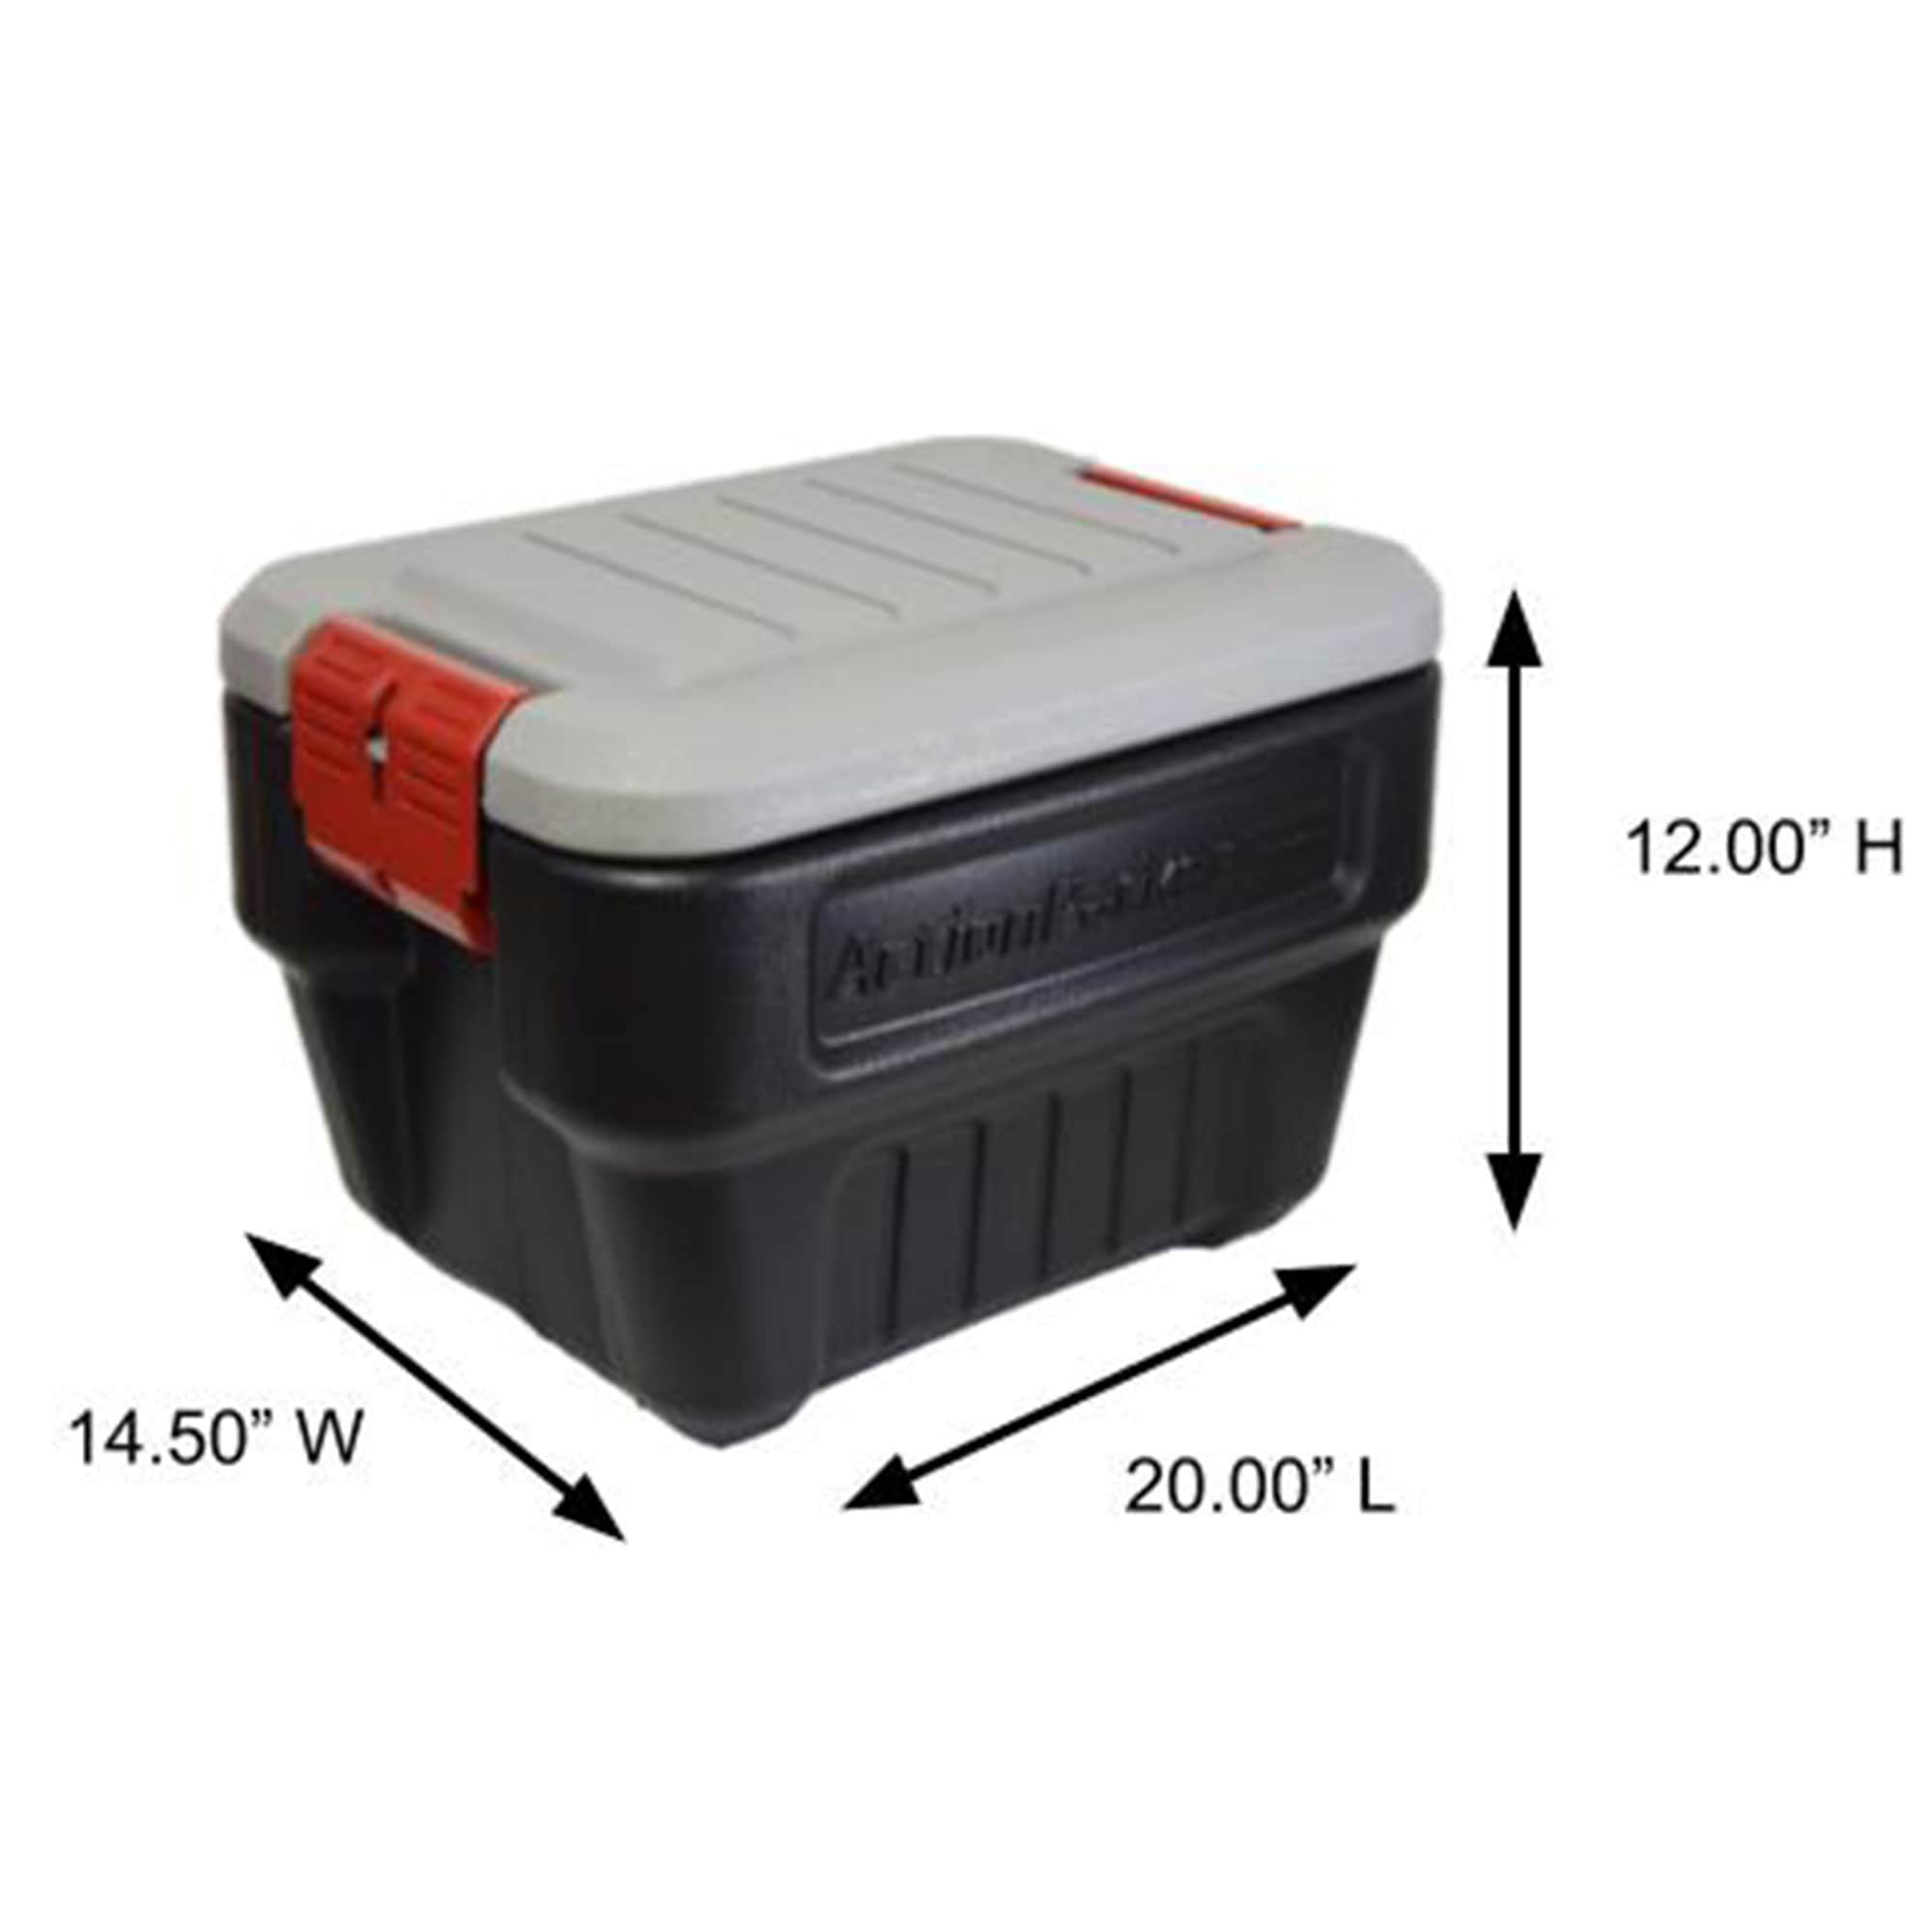 Rubbermaid ActionPacker Lockable Storage Box, 35 Gal, Grey and Black,  Outdoor, Industrial, Rugged